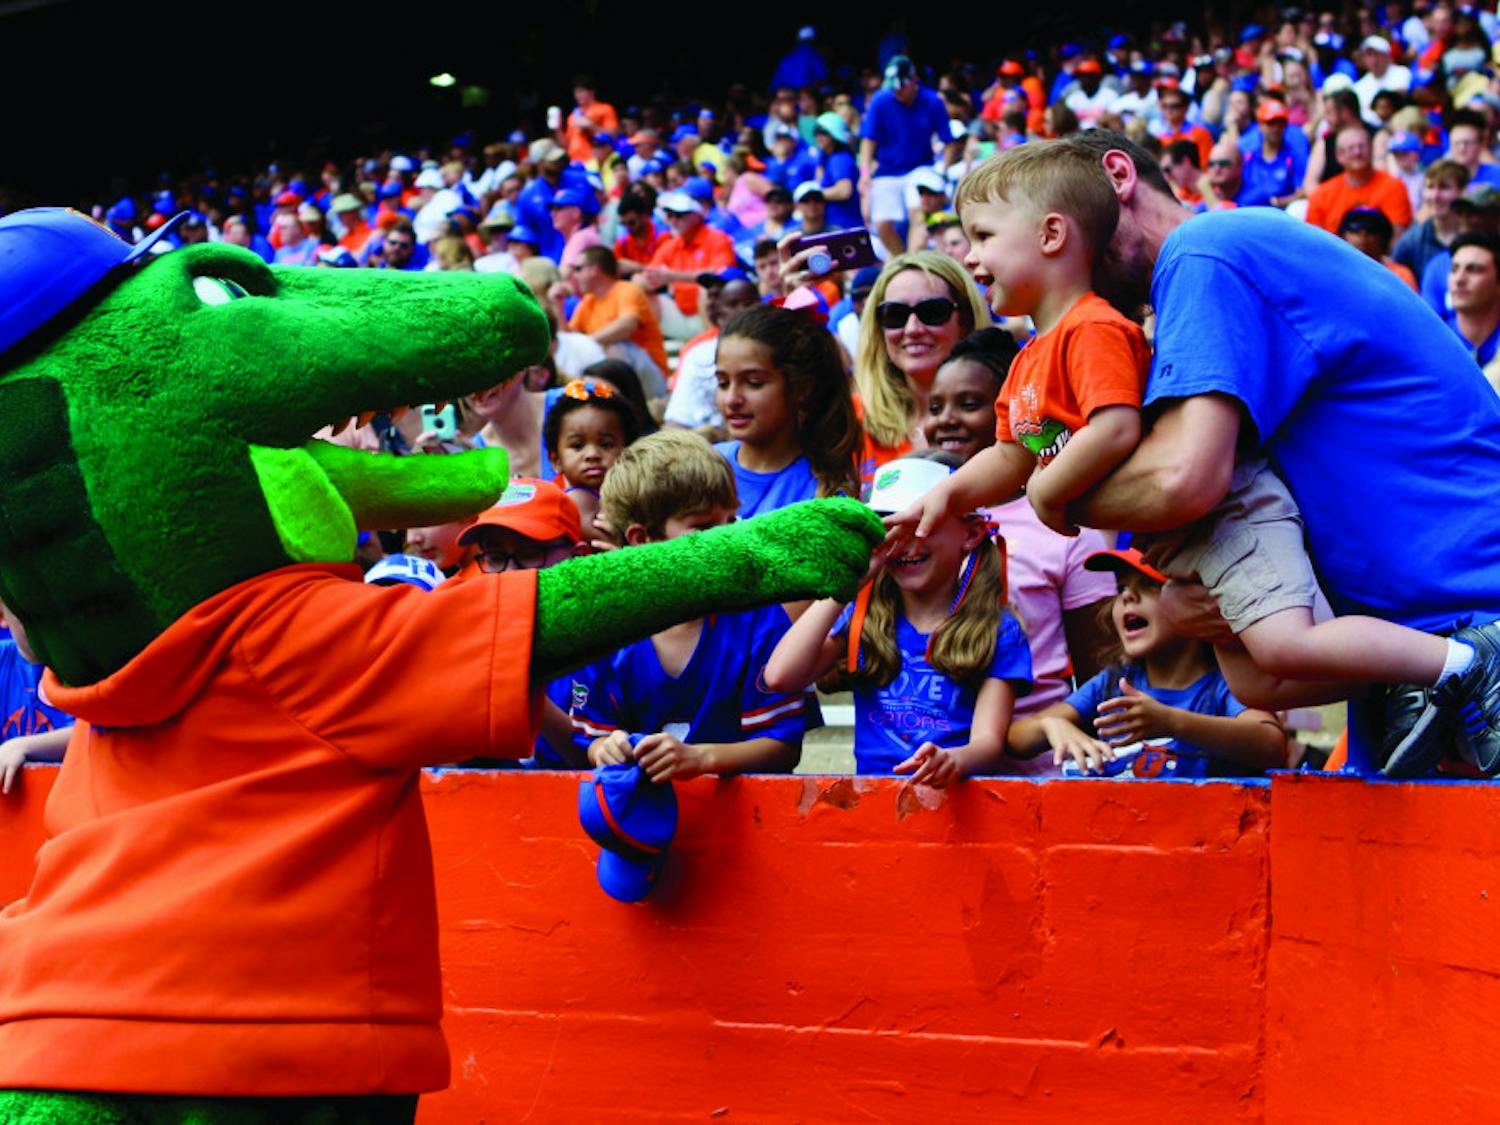 Albert E. Gator greets a young Gator fan during the Orange &amp; Blue football game in January 2019. The scrimmage held at Ben Hill Griffin Stadium had 53,015 in attendance.